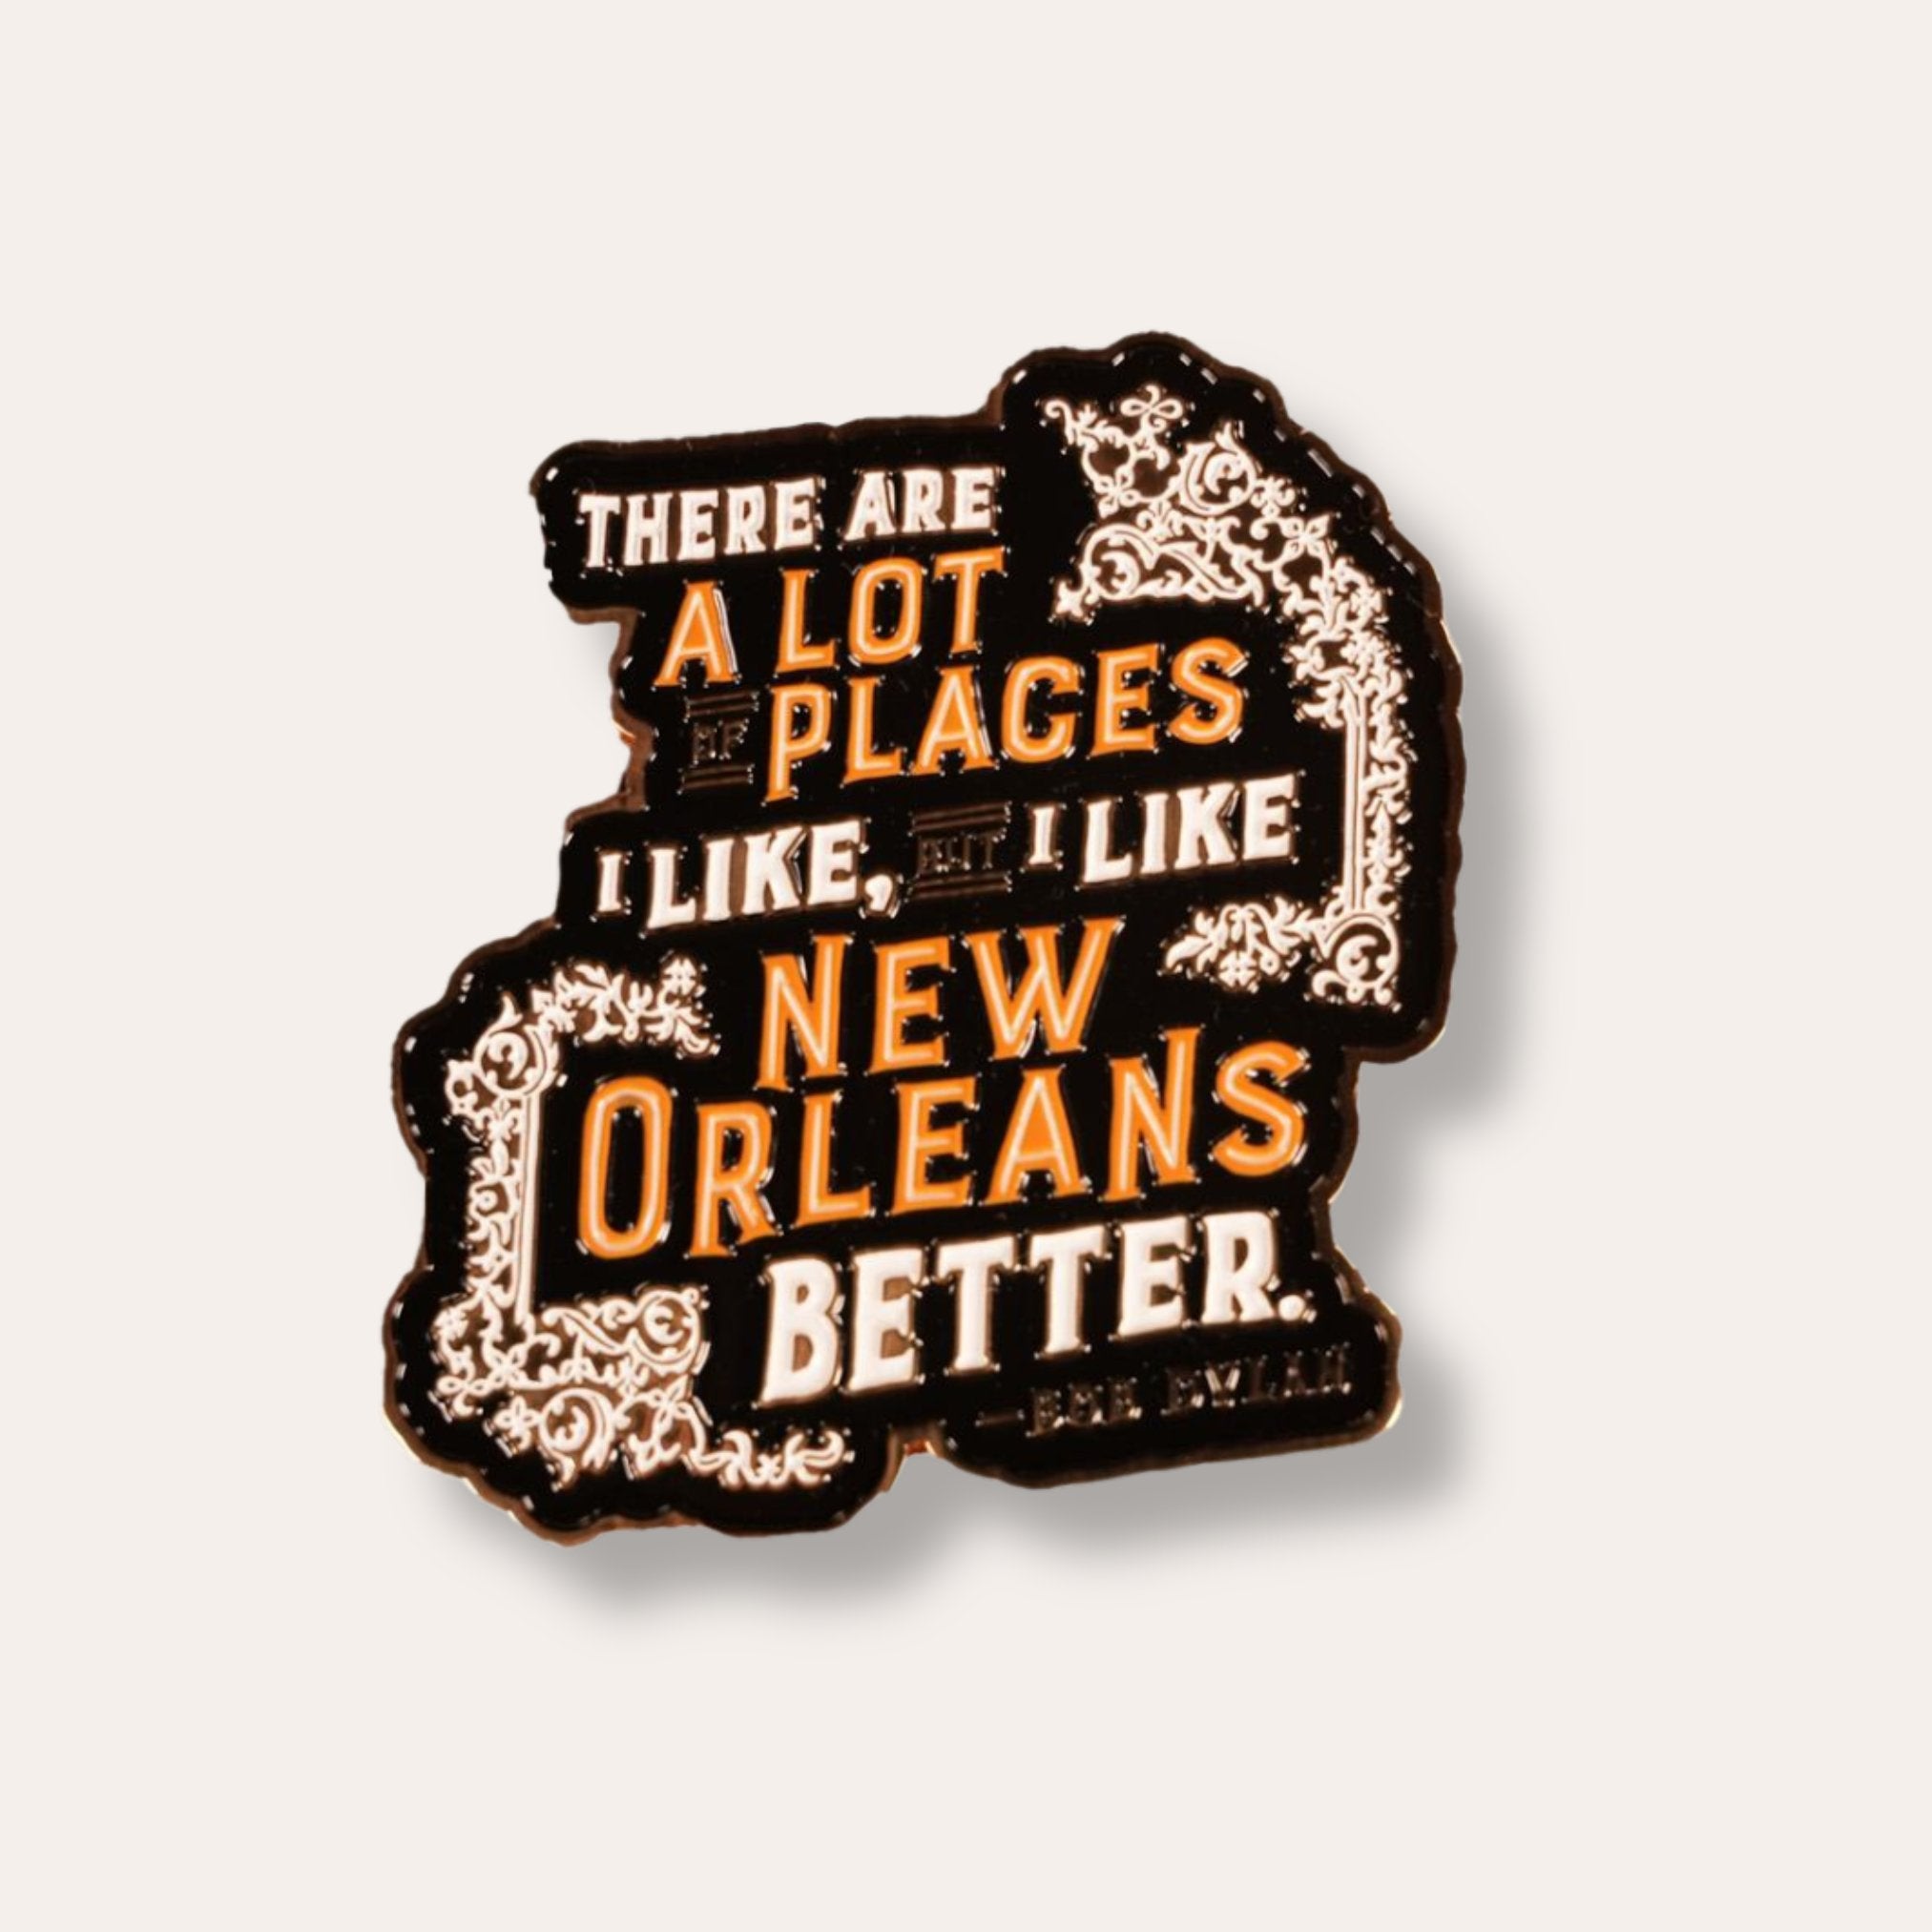 I Like New Orleans Better Magnet - Dirty Coast Press